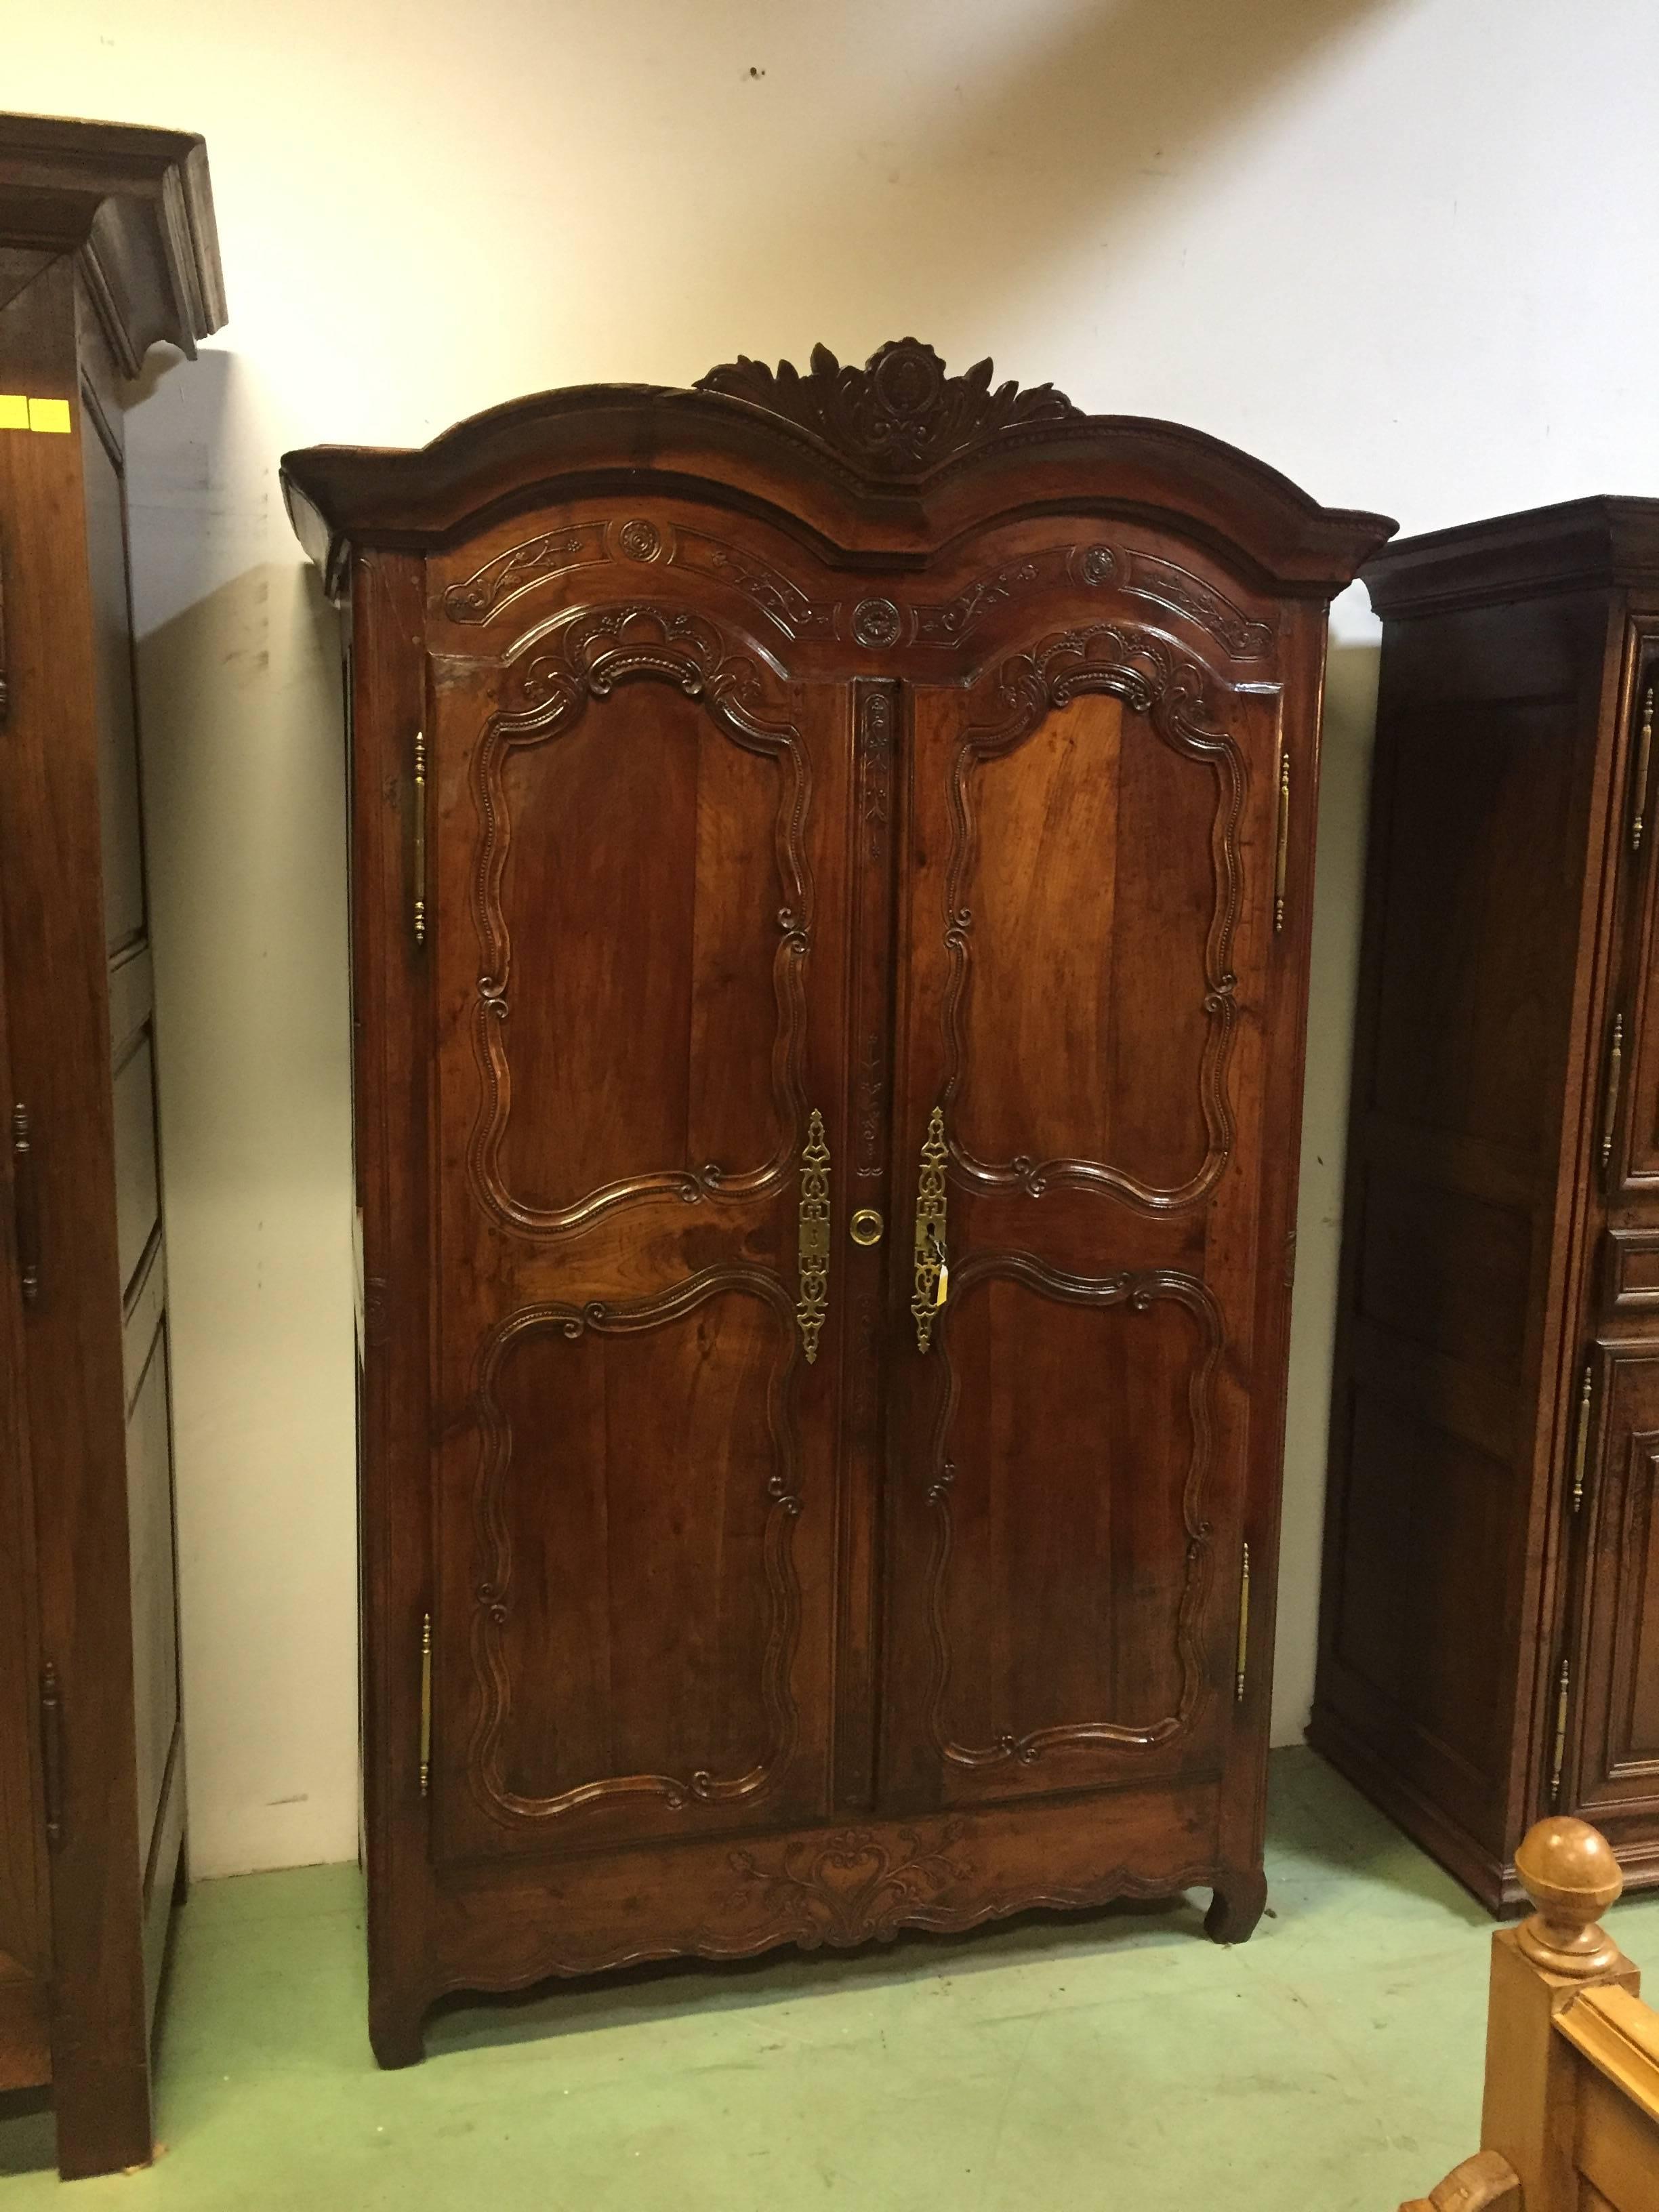 Very nice Louis XV wardrobe 18th from Rennes in Brittany. Nice patine of fruitwood.